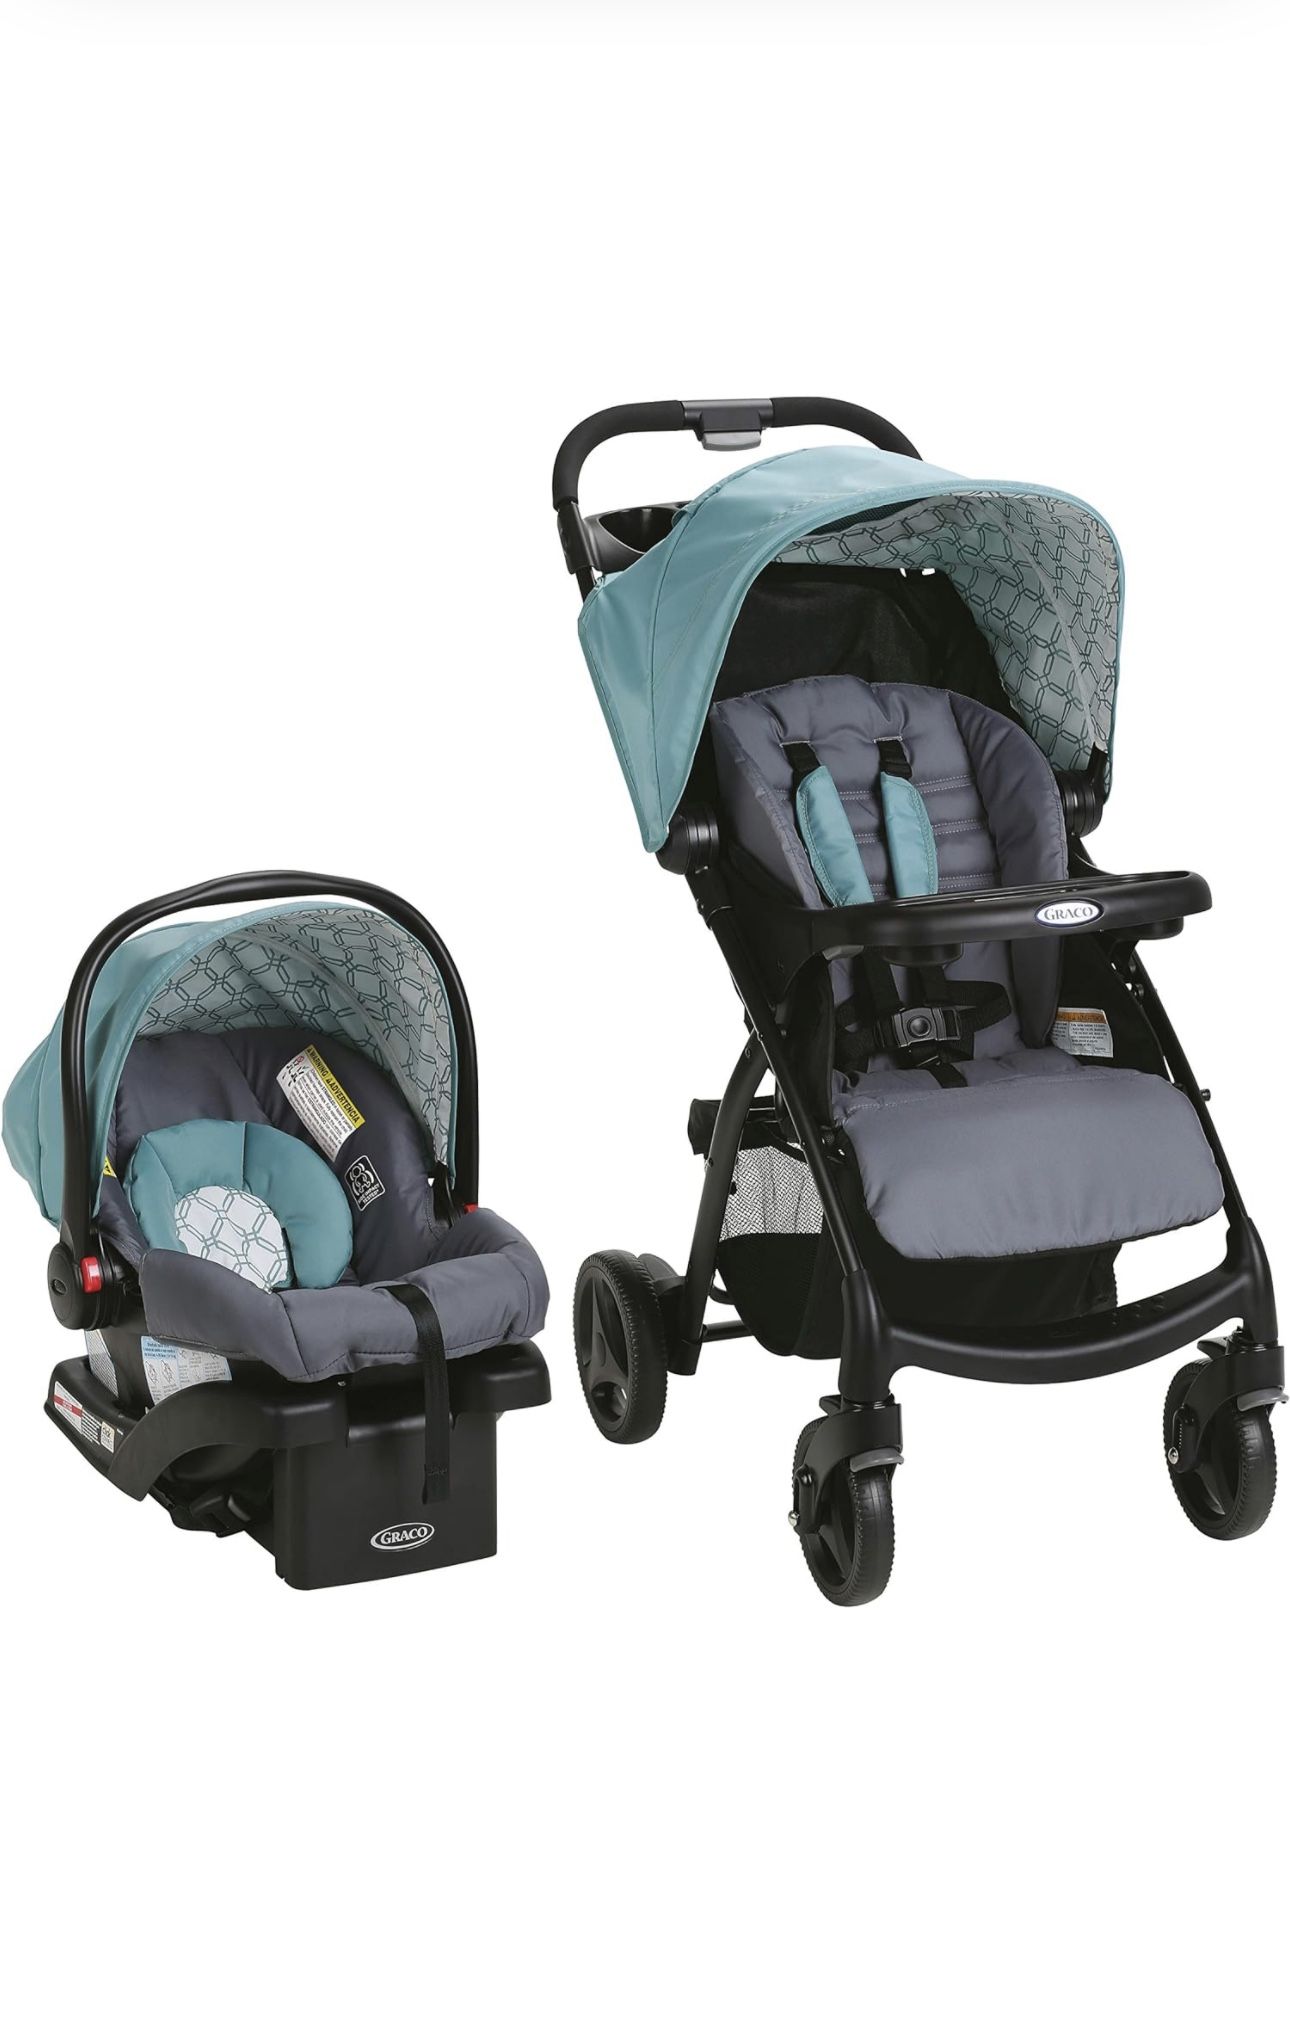 Used — Graco Travel System Includes: Stroller & SnugRide 30 Infant Car Seat